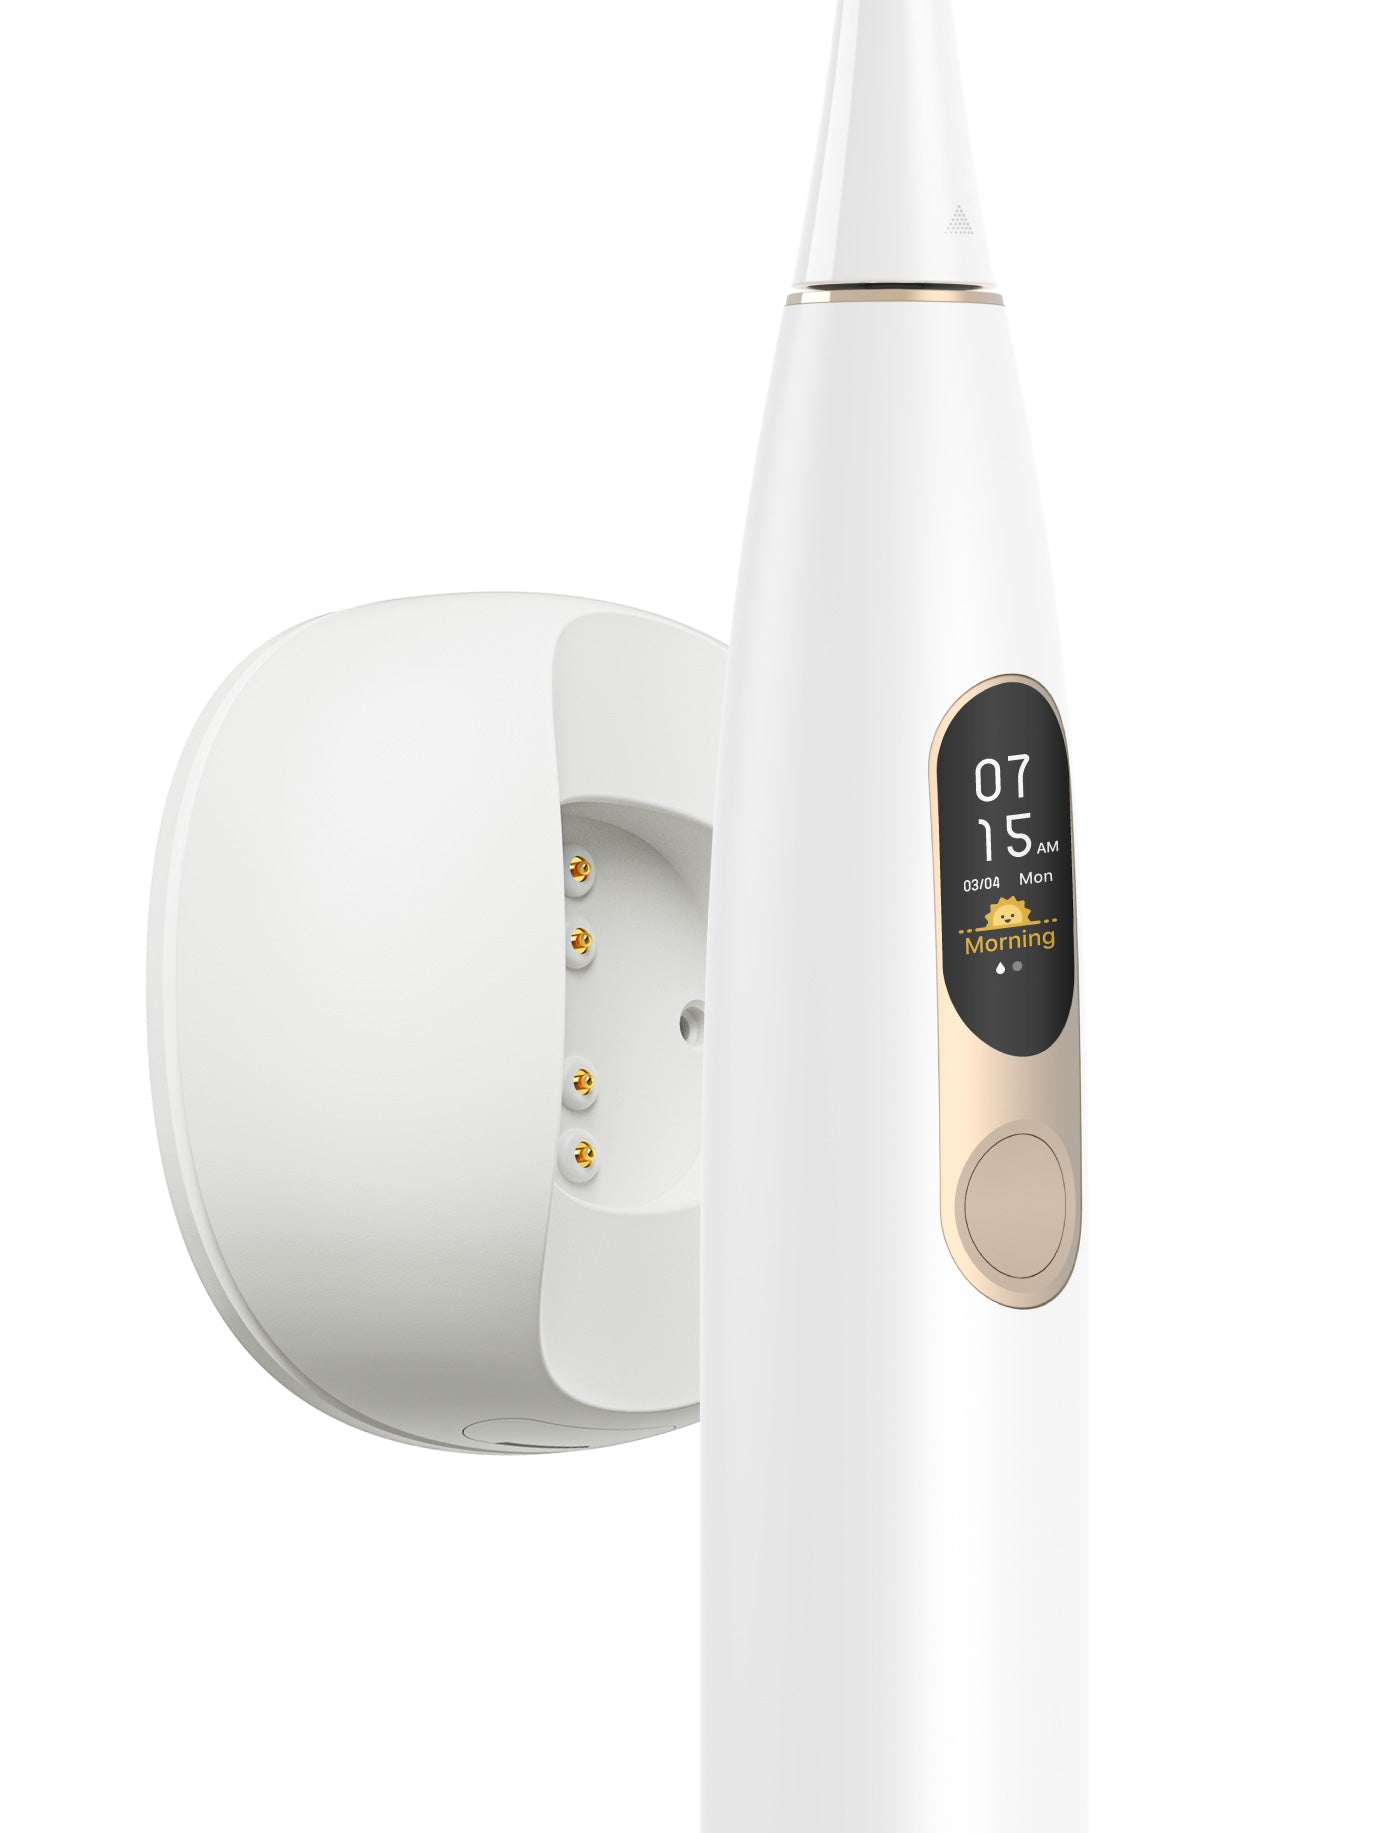 Oclean Charger & Base-Toothbrush Holders-Oclean US Store